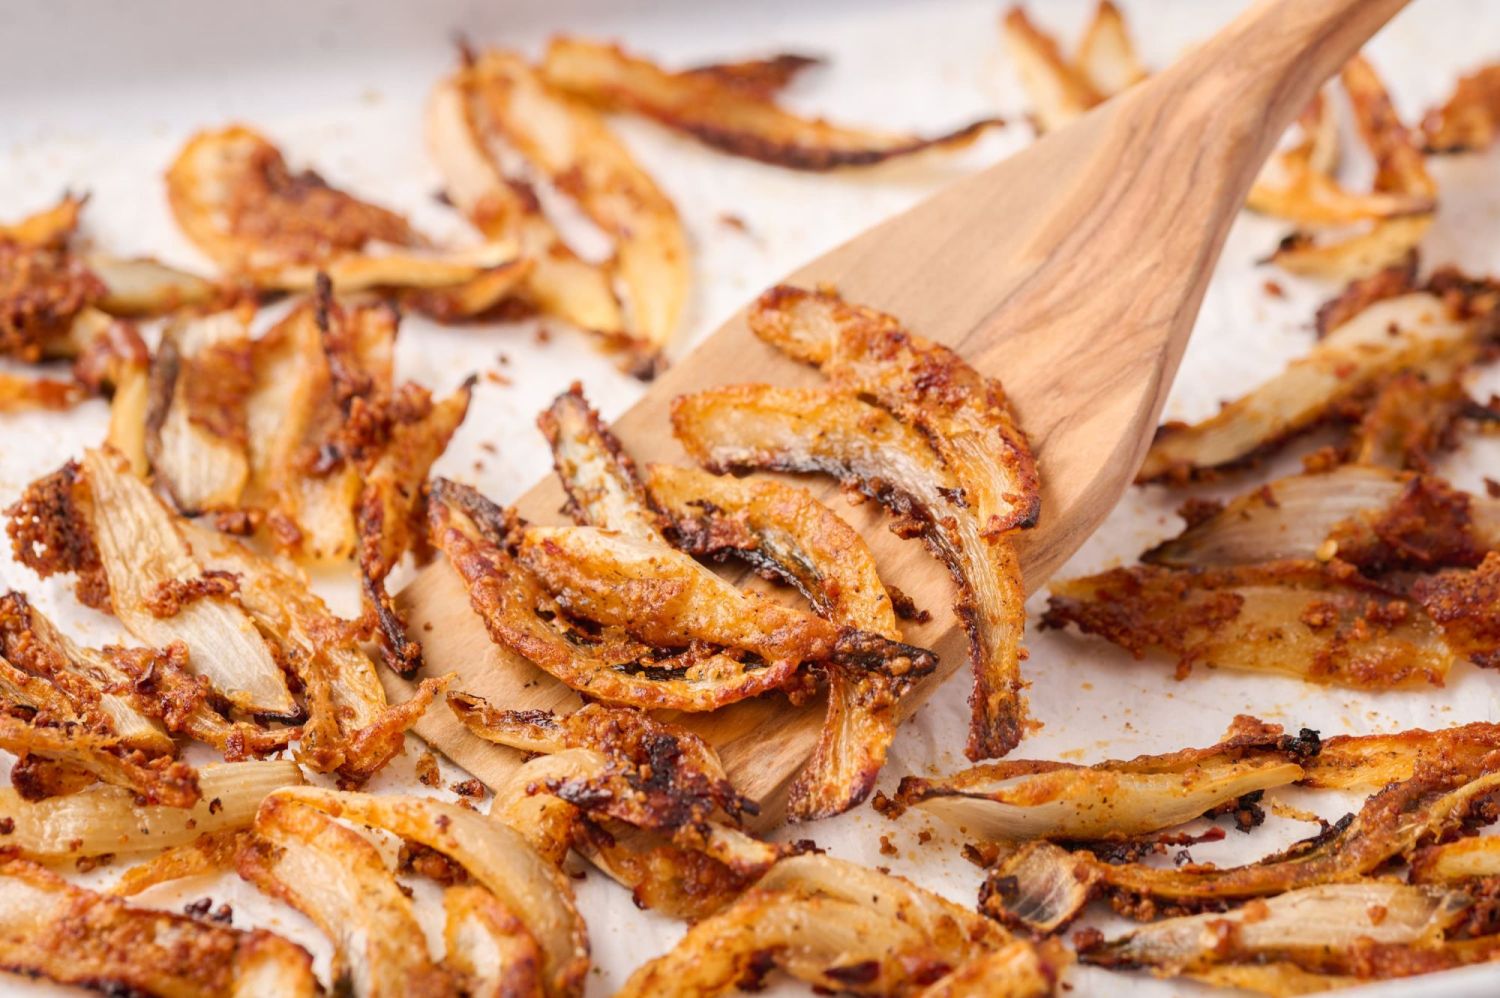 Onion straws coated with Parmesan cheese and spices on a baking sheet with a saptula.